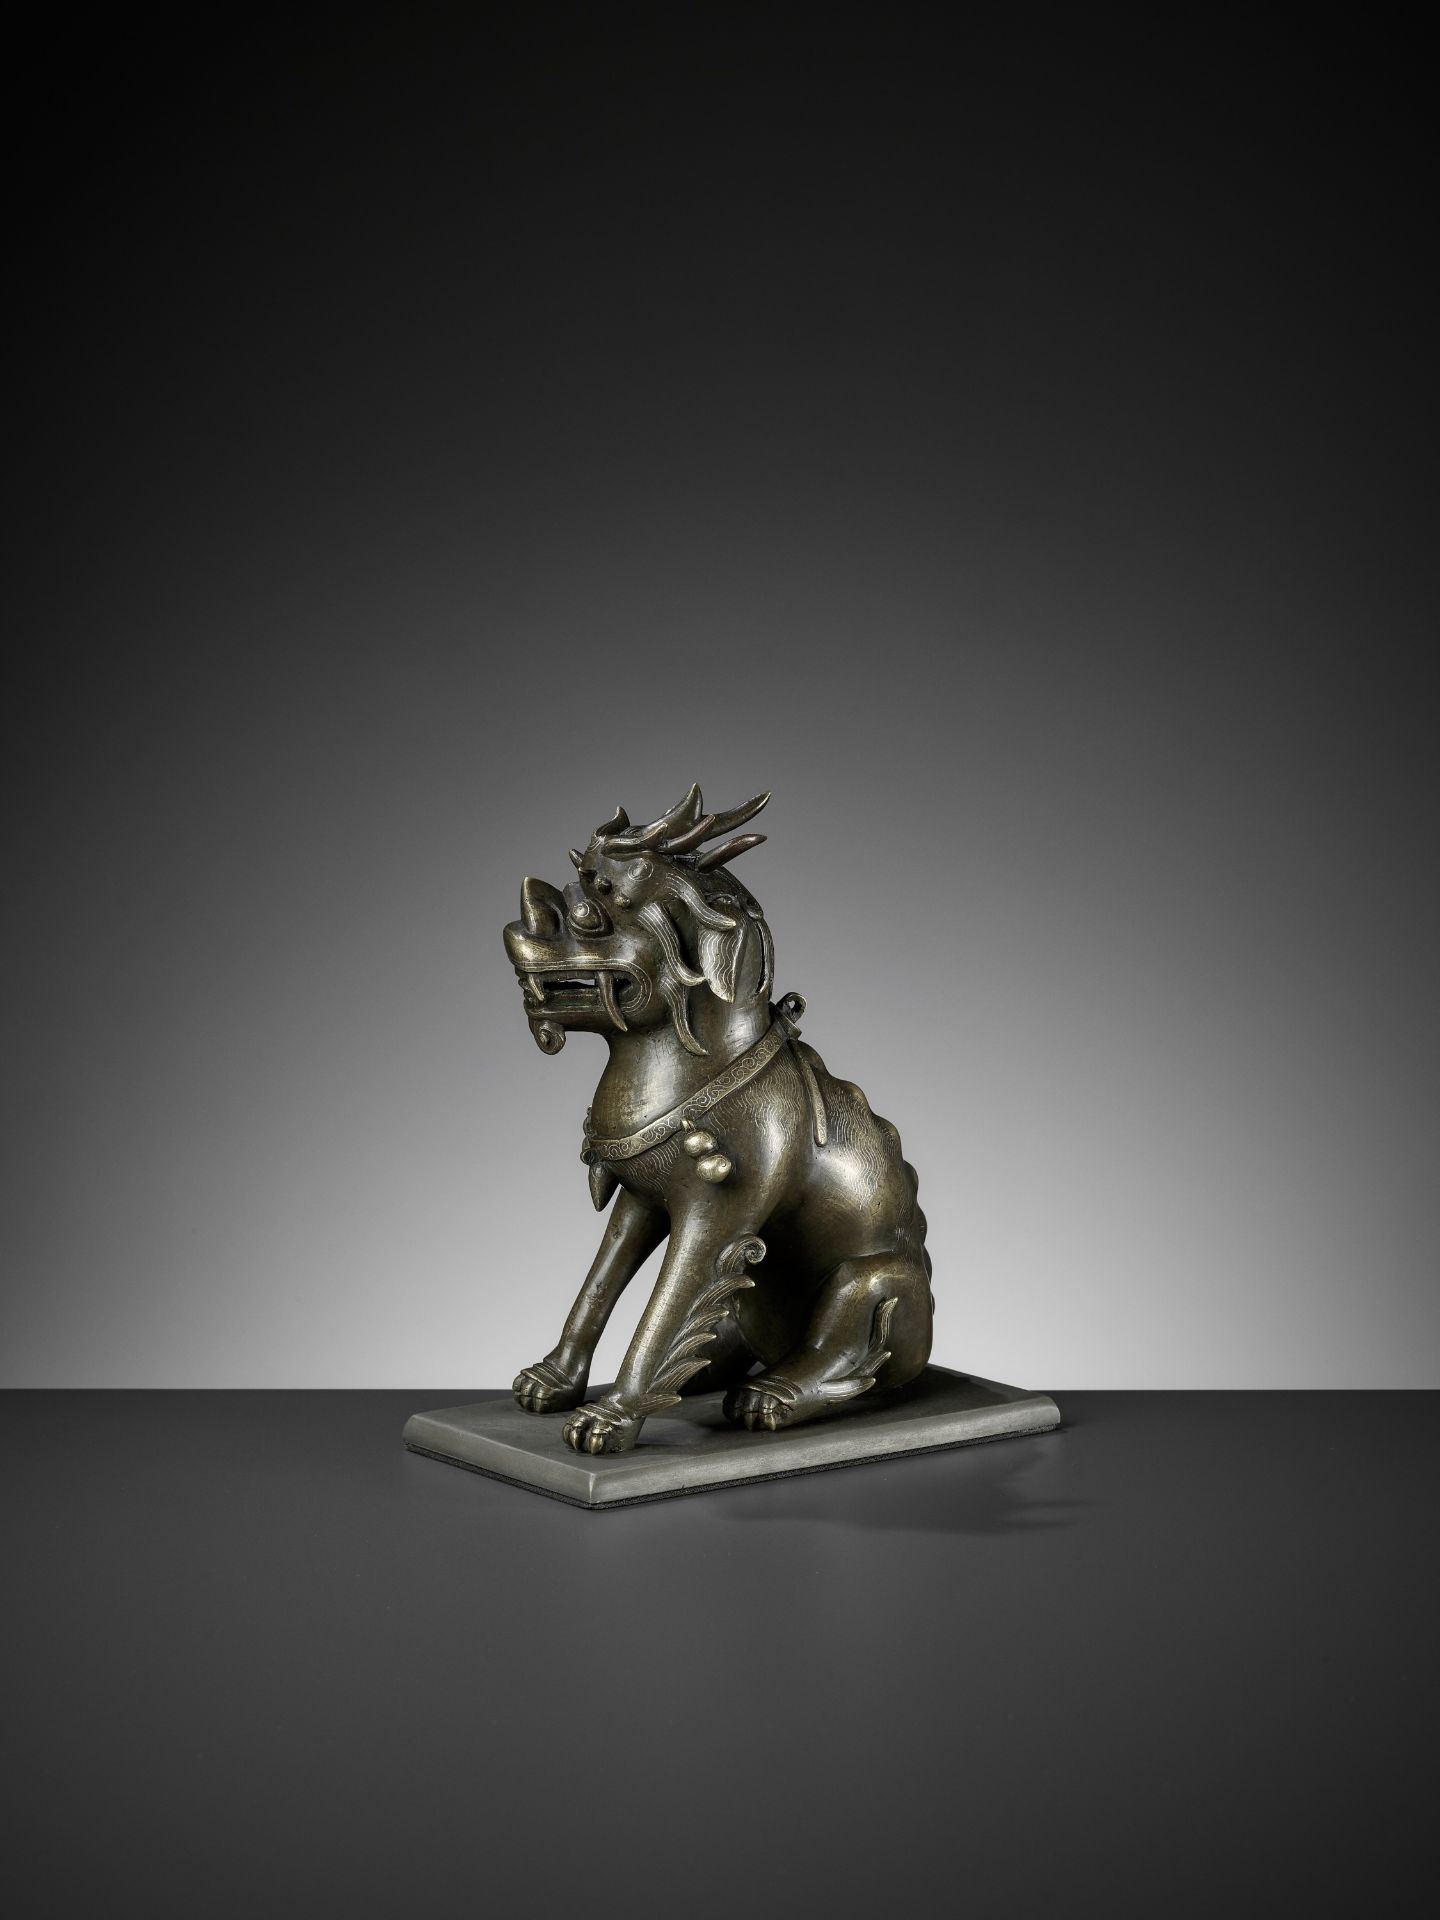 A SILVER WIRE-INLAID BRONZE FIGURE OF A QILIN, ATTRIBUTED TO SHISOU, QING DYNASTY - Image 5 of 12